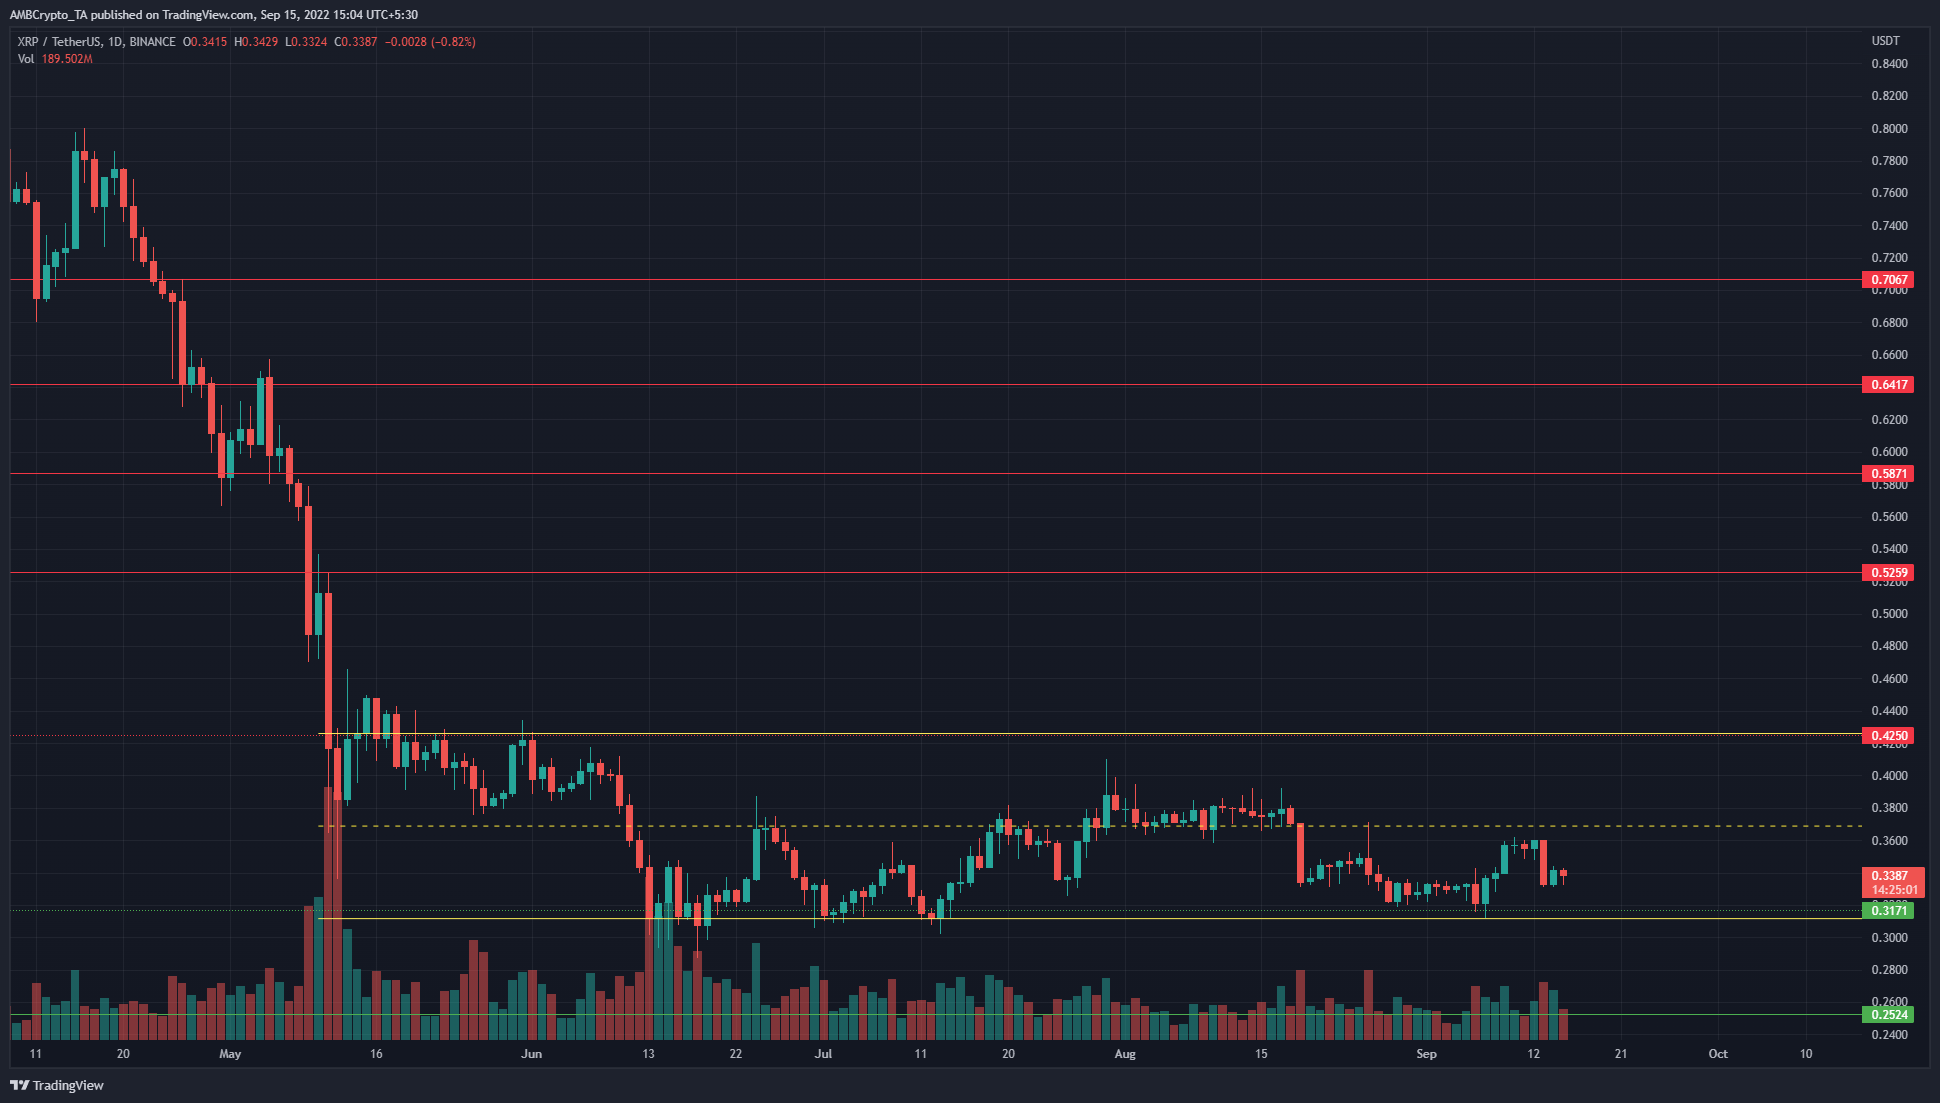 XRP trades a range, the long-term structure remains bearish